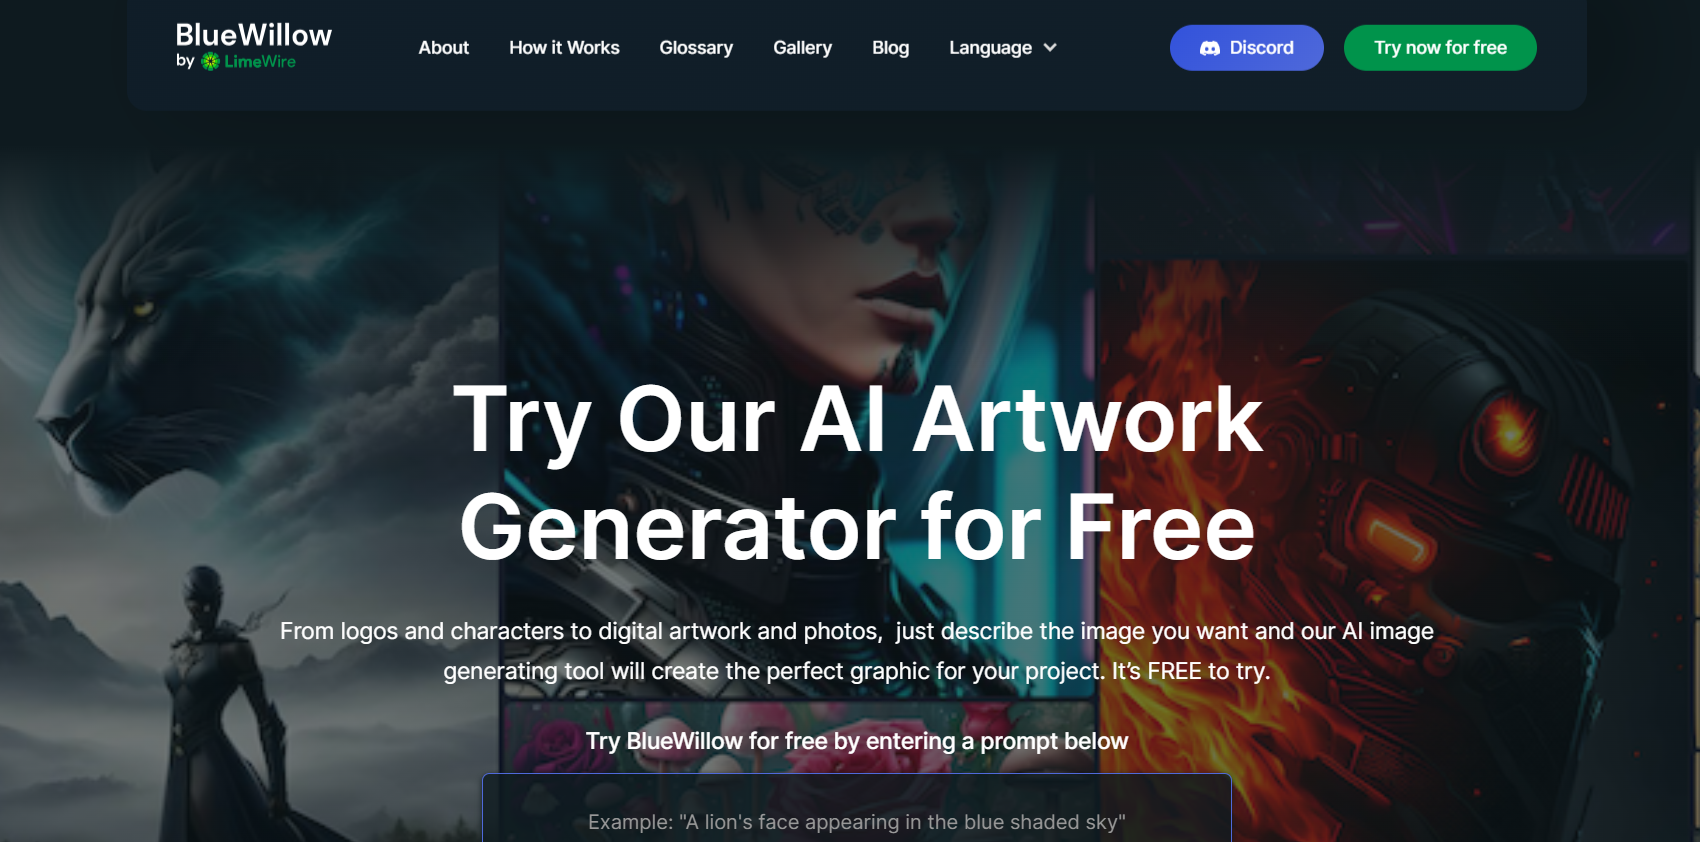 BlueWillow.ai, Try Our AI Artwork Generator for Free